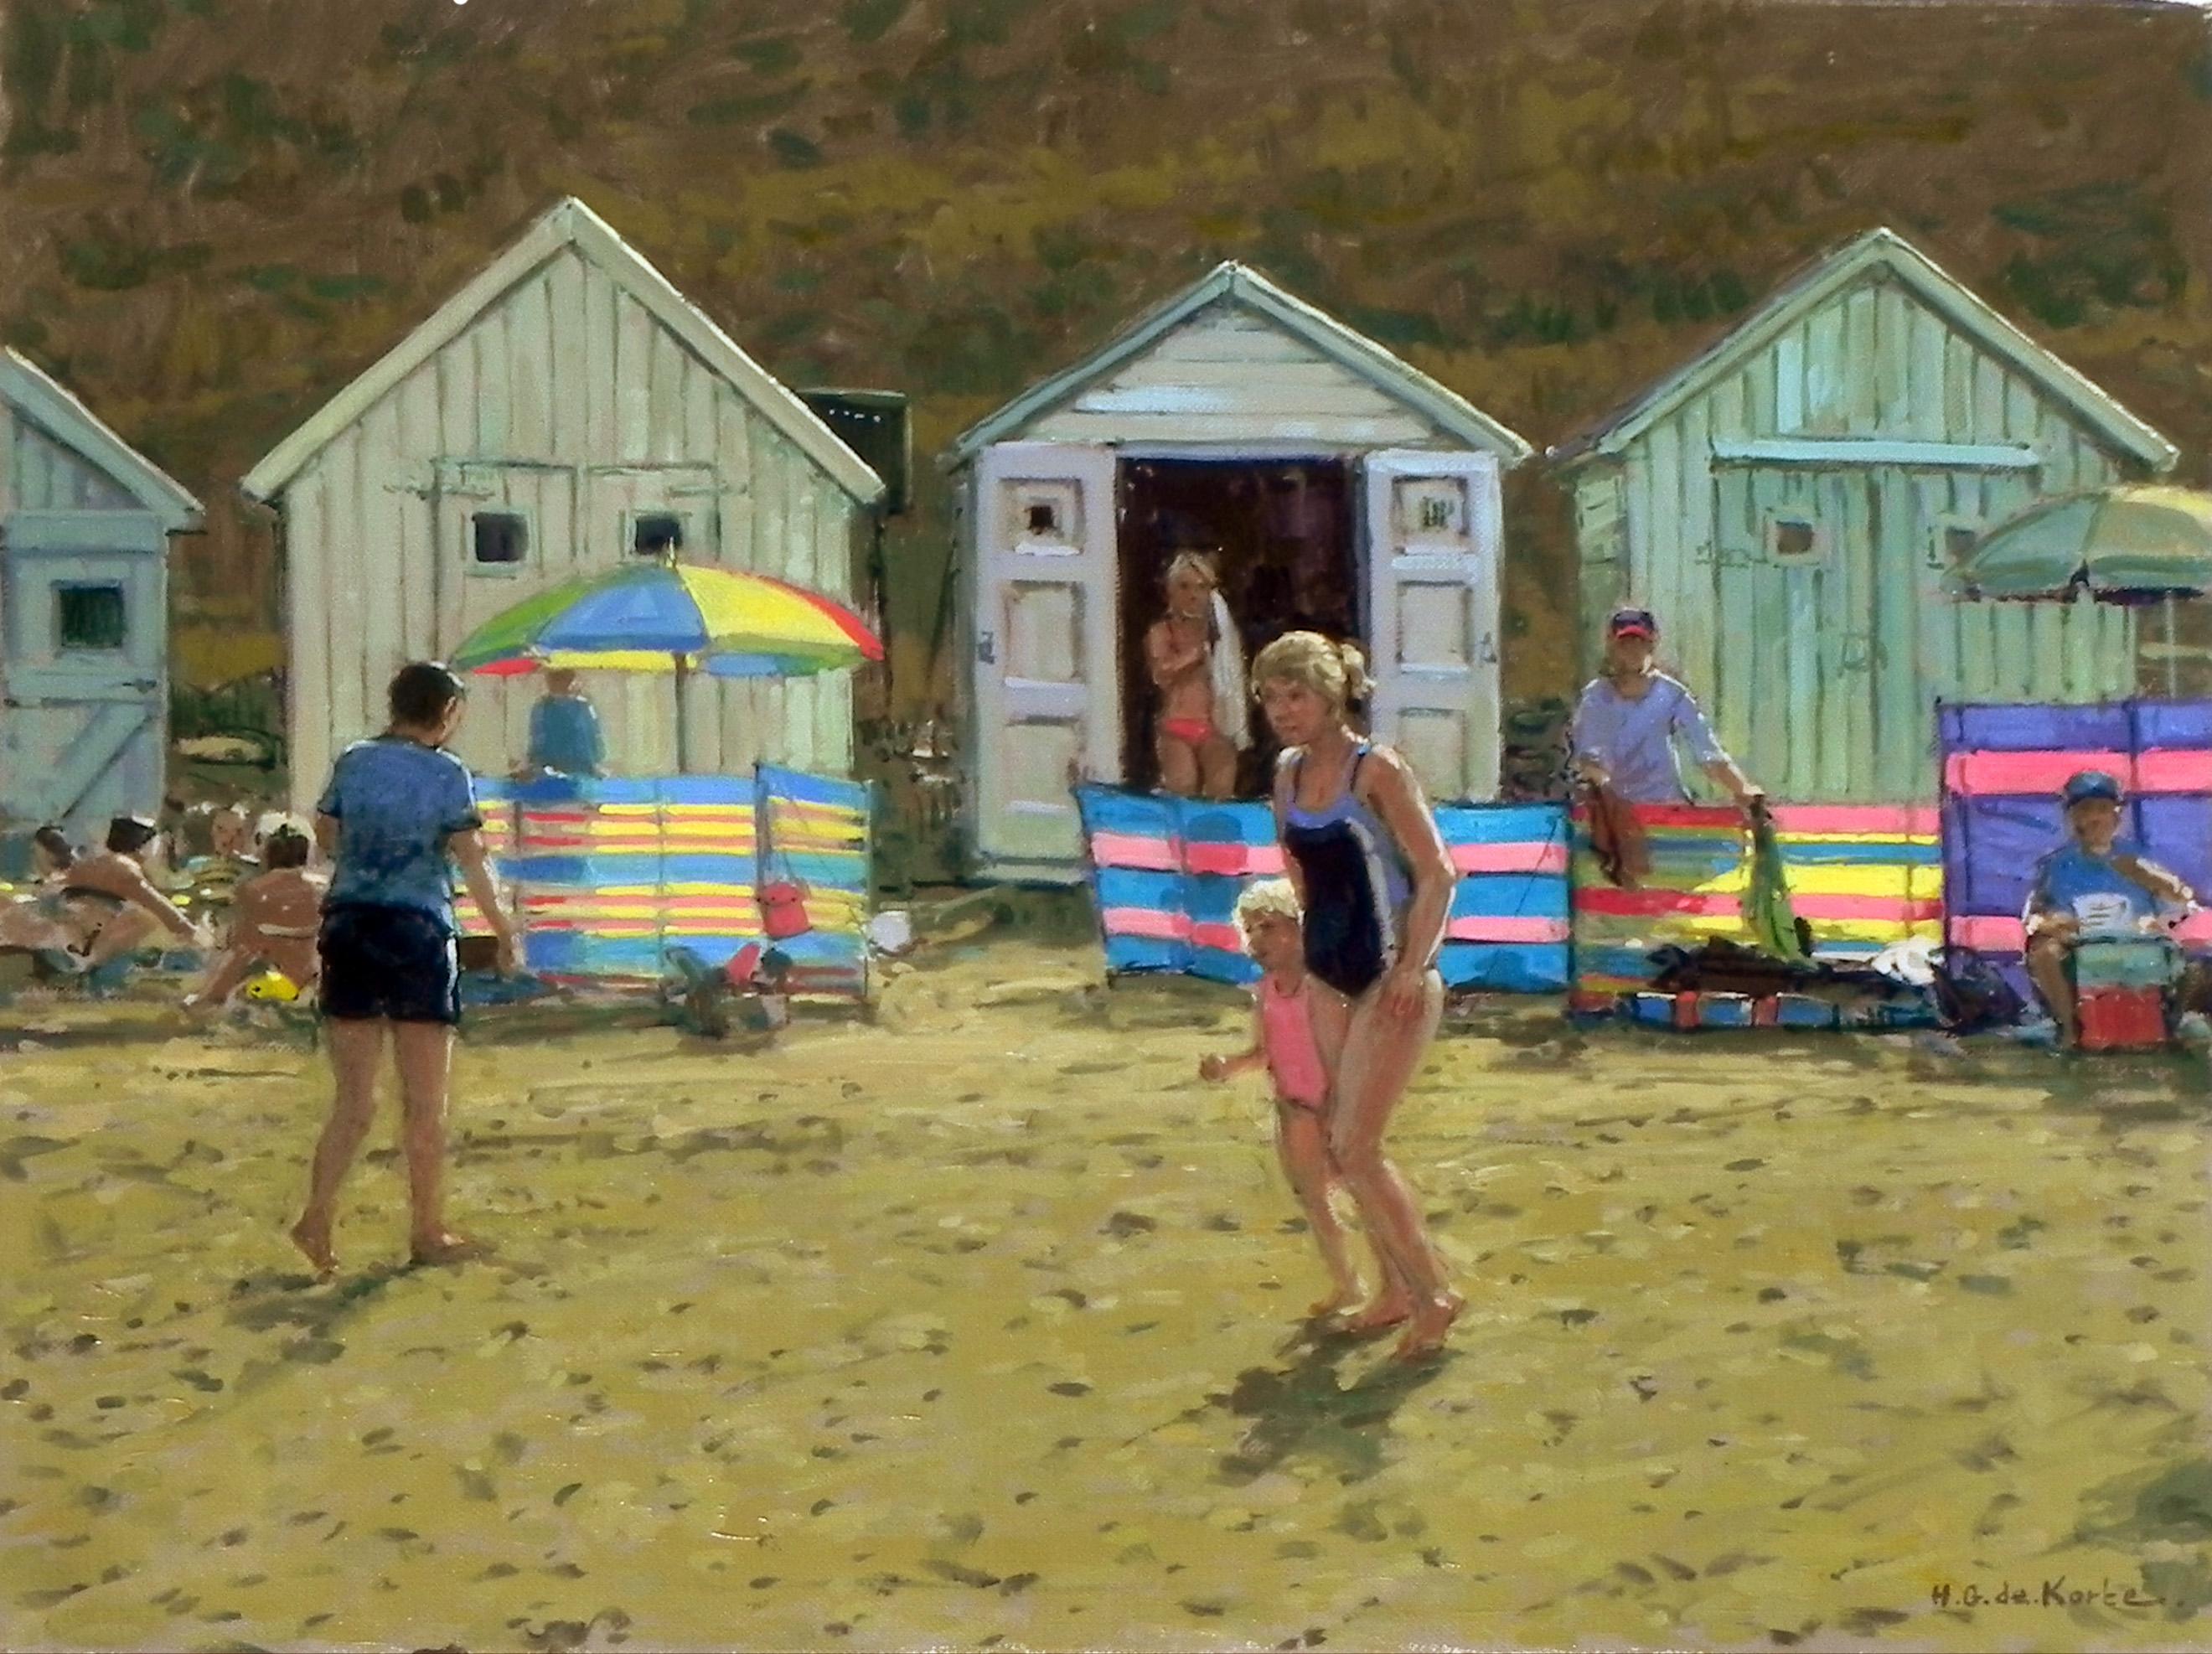 "Day at the Beach", Henni de Korte, 20x24 in, Oil on Canvas, Impressionism